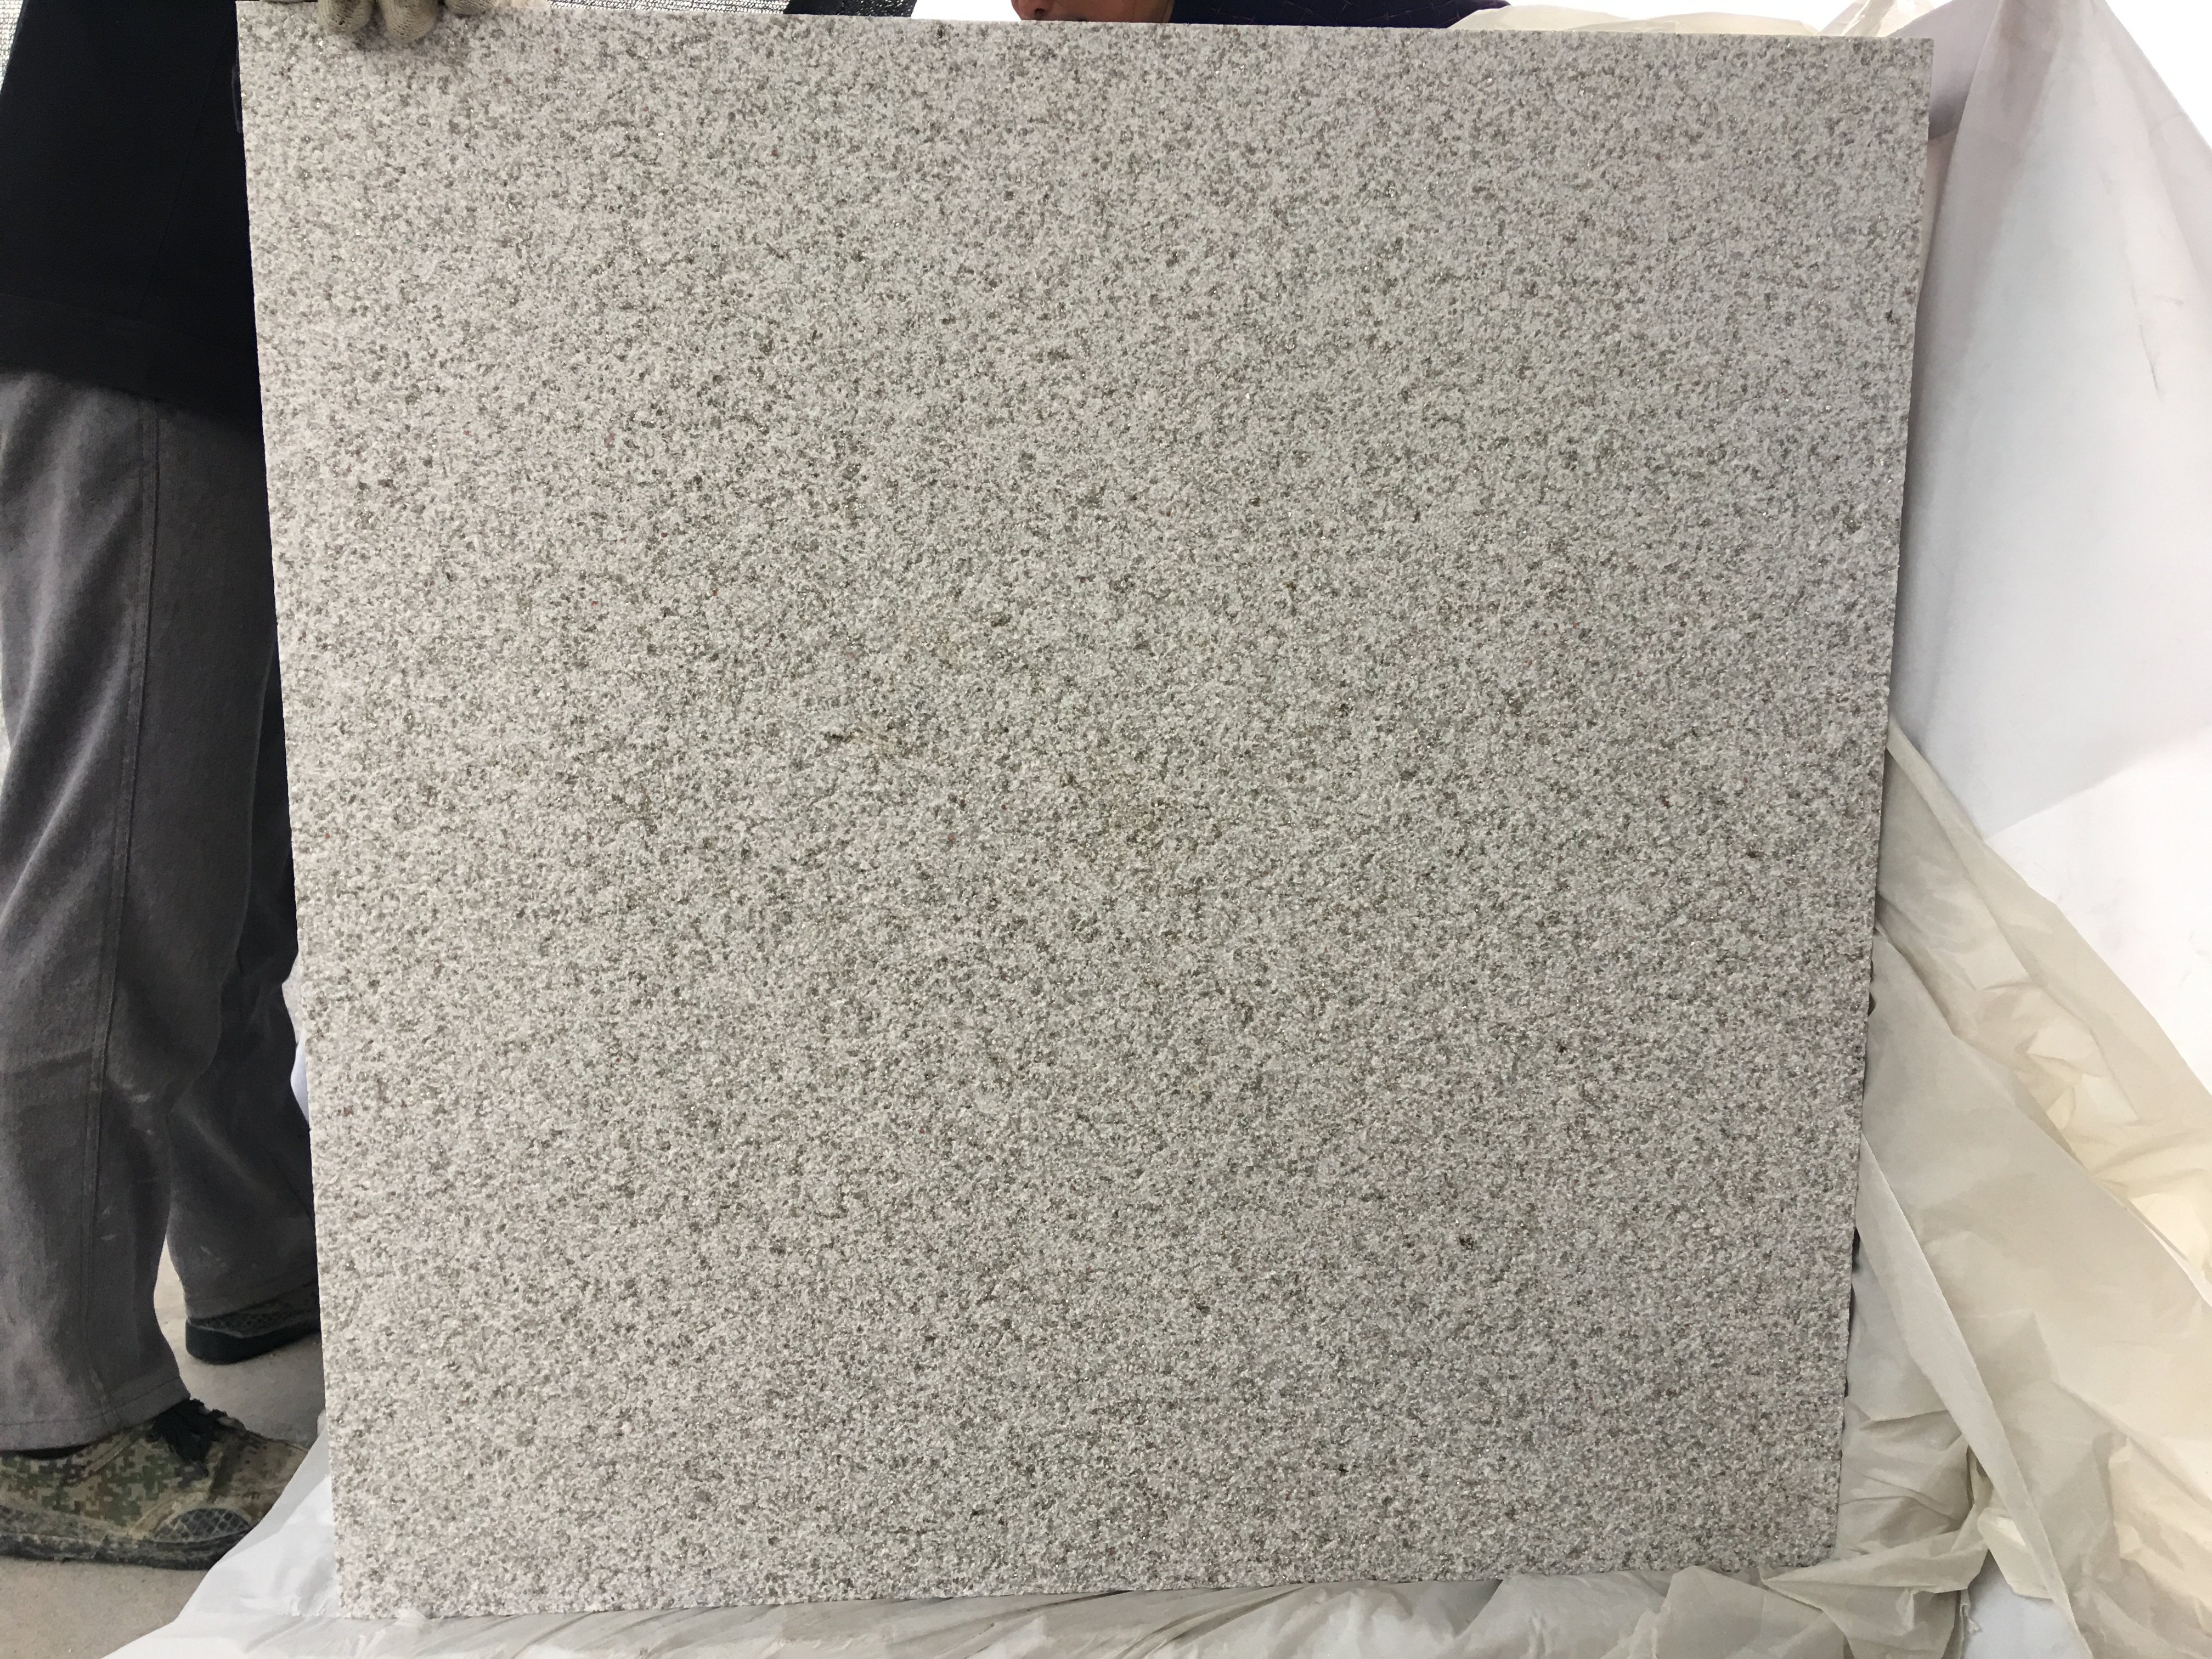 Galaxy White Granite Tiles Bush-hammered For Wall Cladding Paving